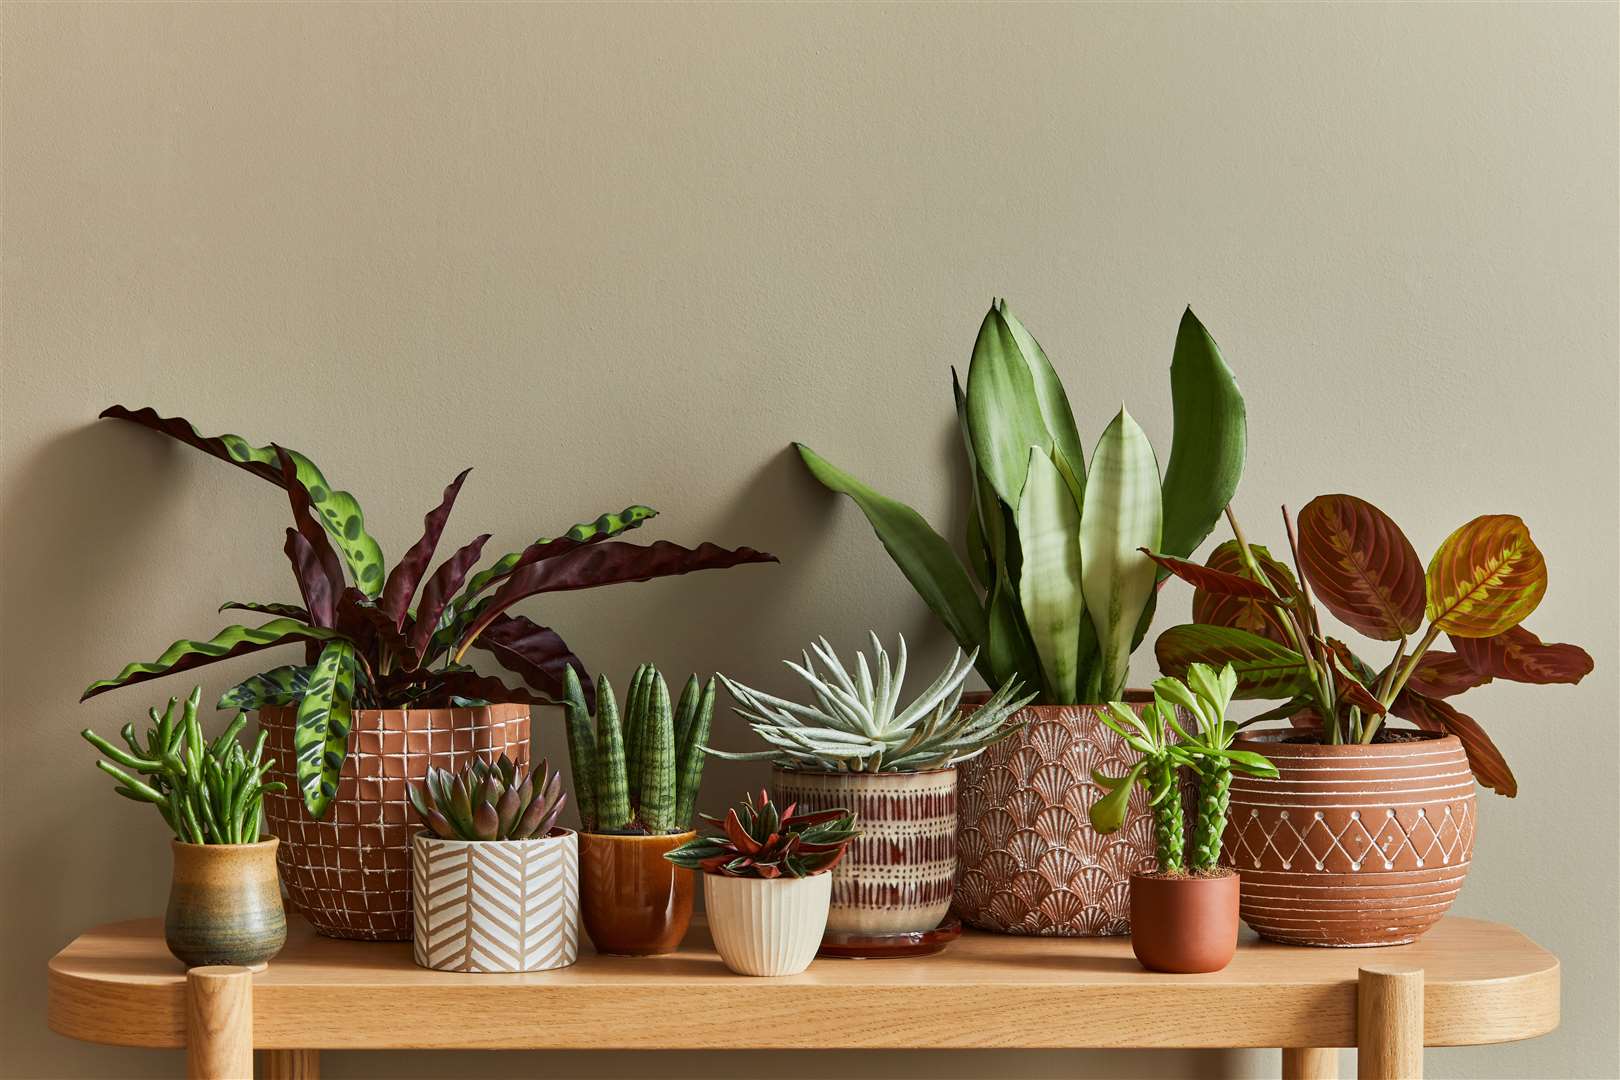 House plants can add colour and oxygen to your home.